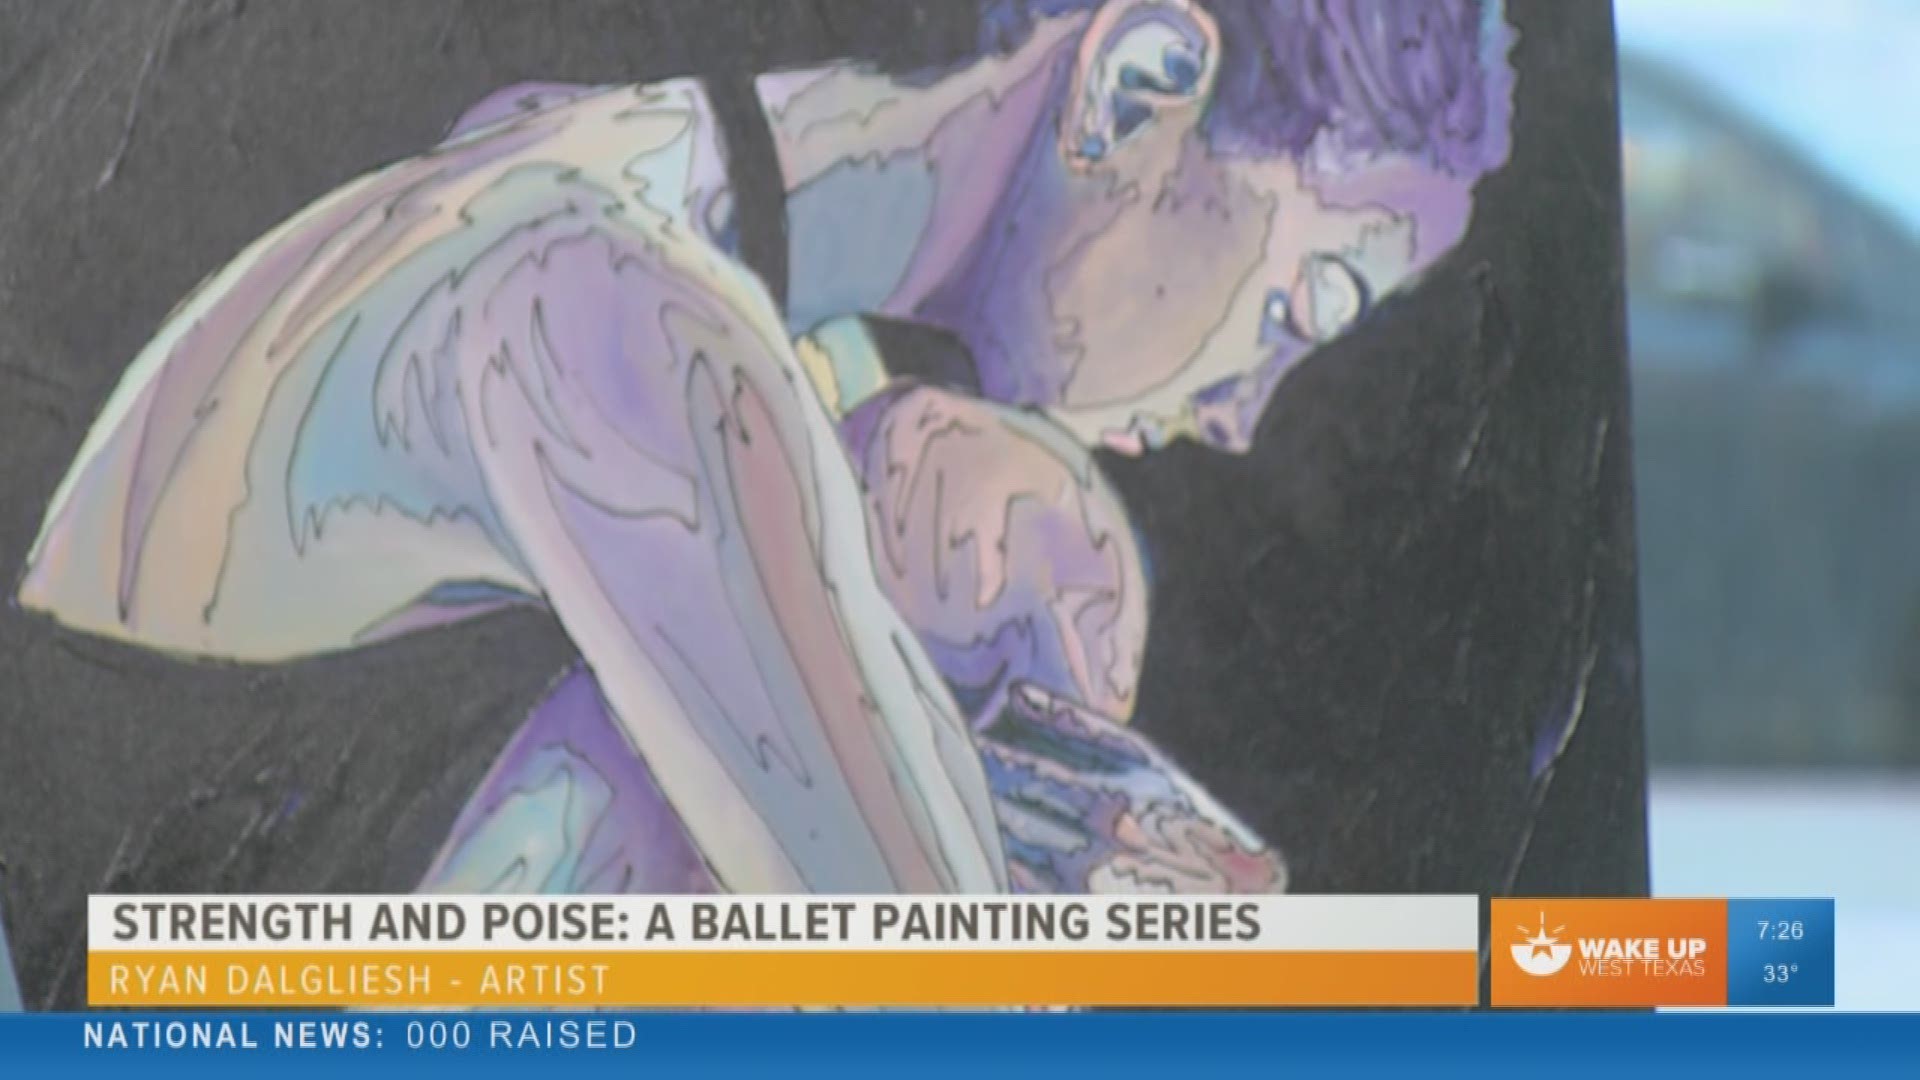 Our Malik Mingo speaks with local artist, Ryan Dalgliesh about his new exhibit that features ballet dancers.